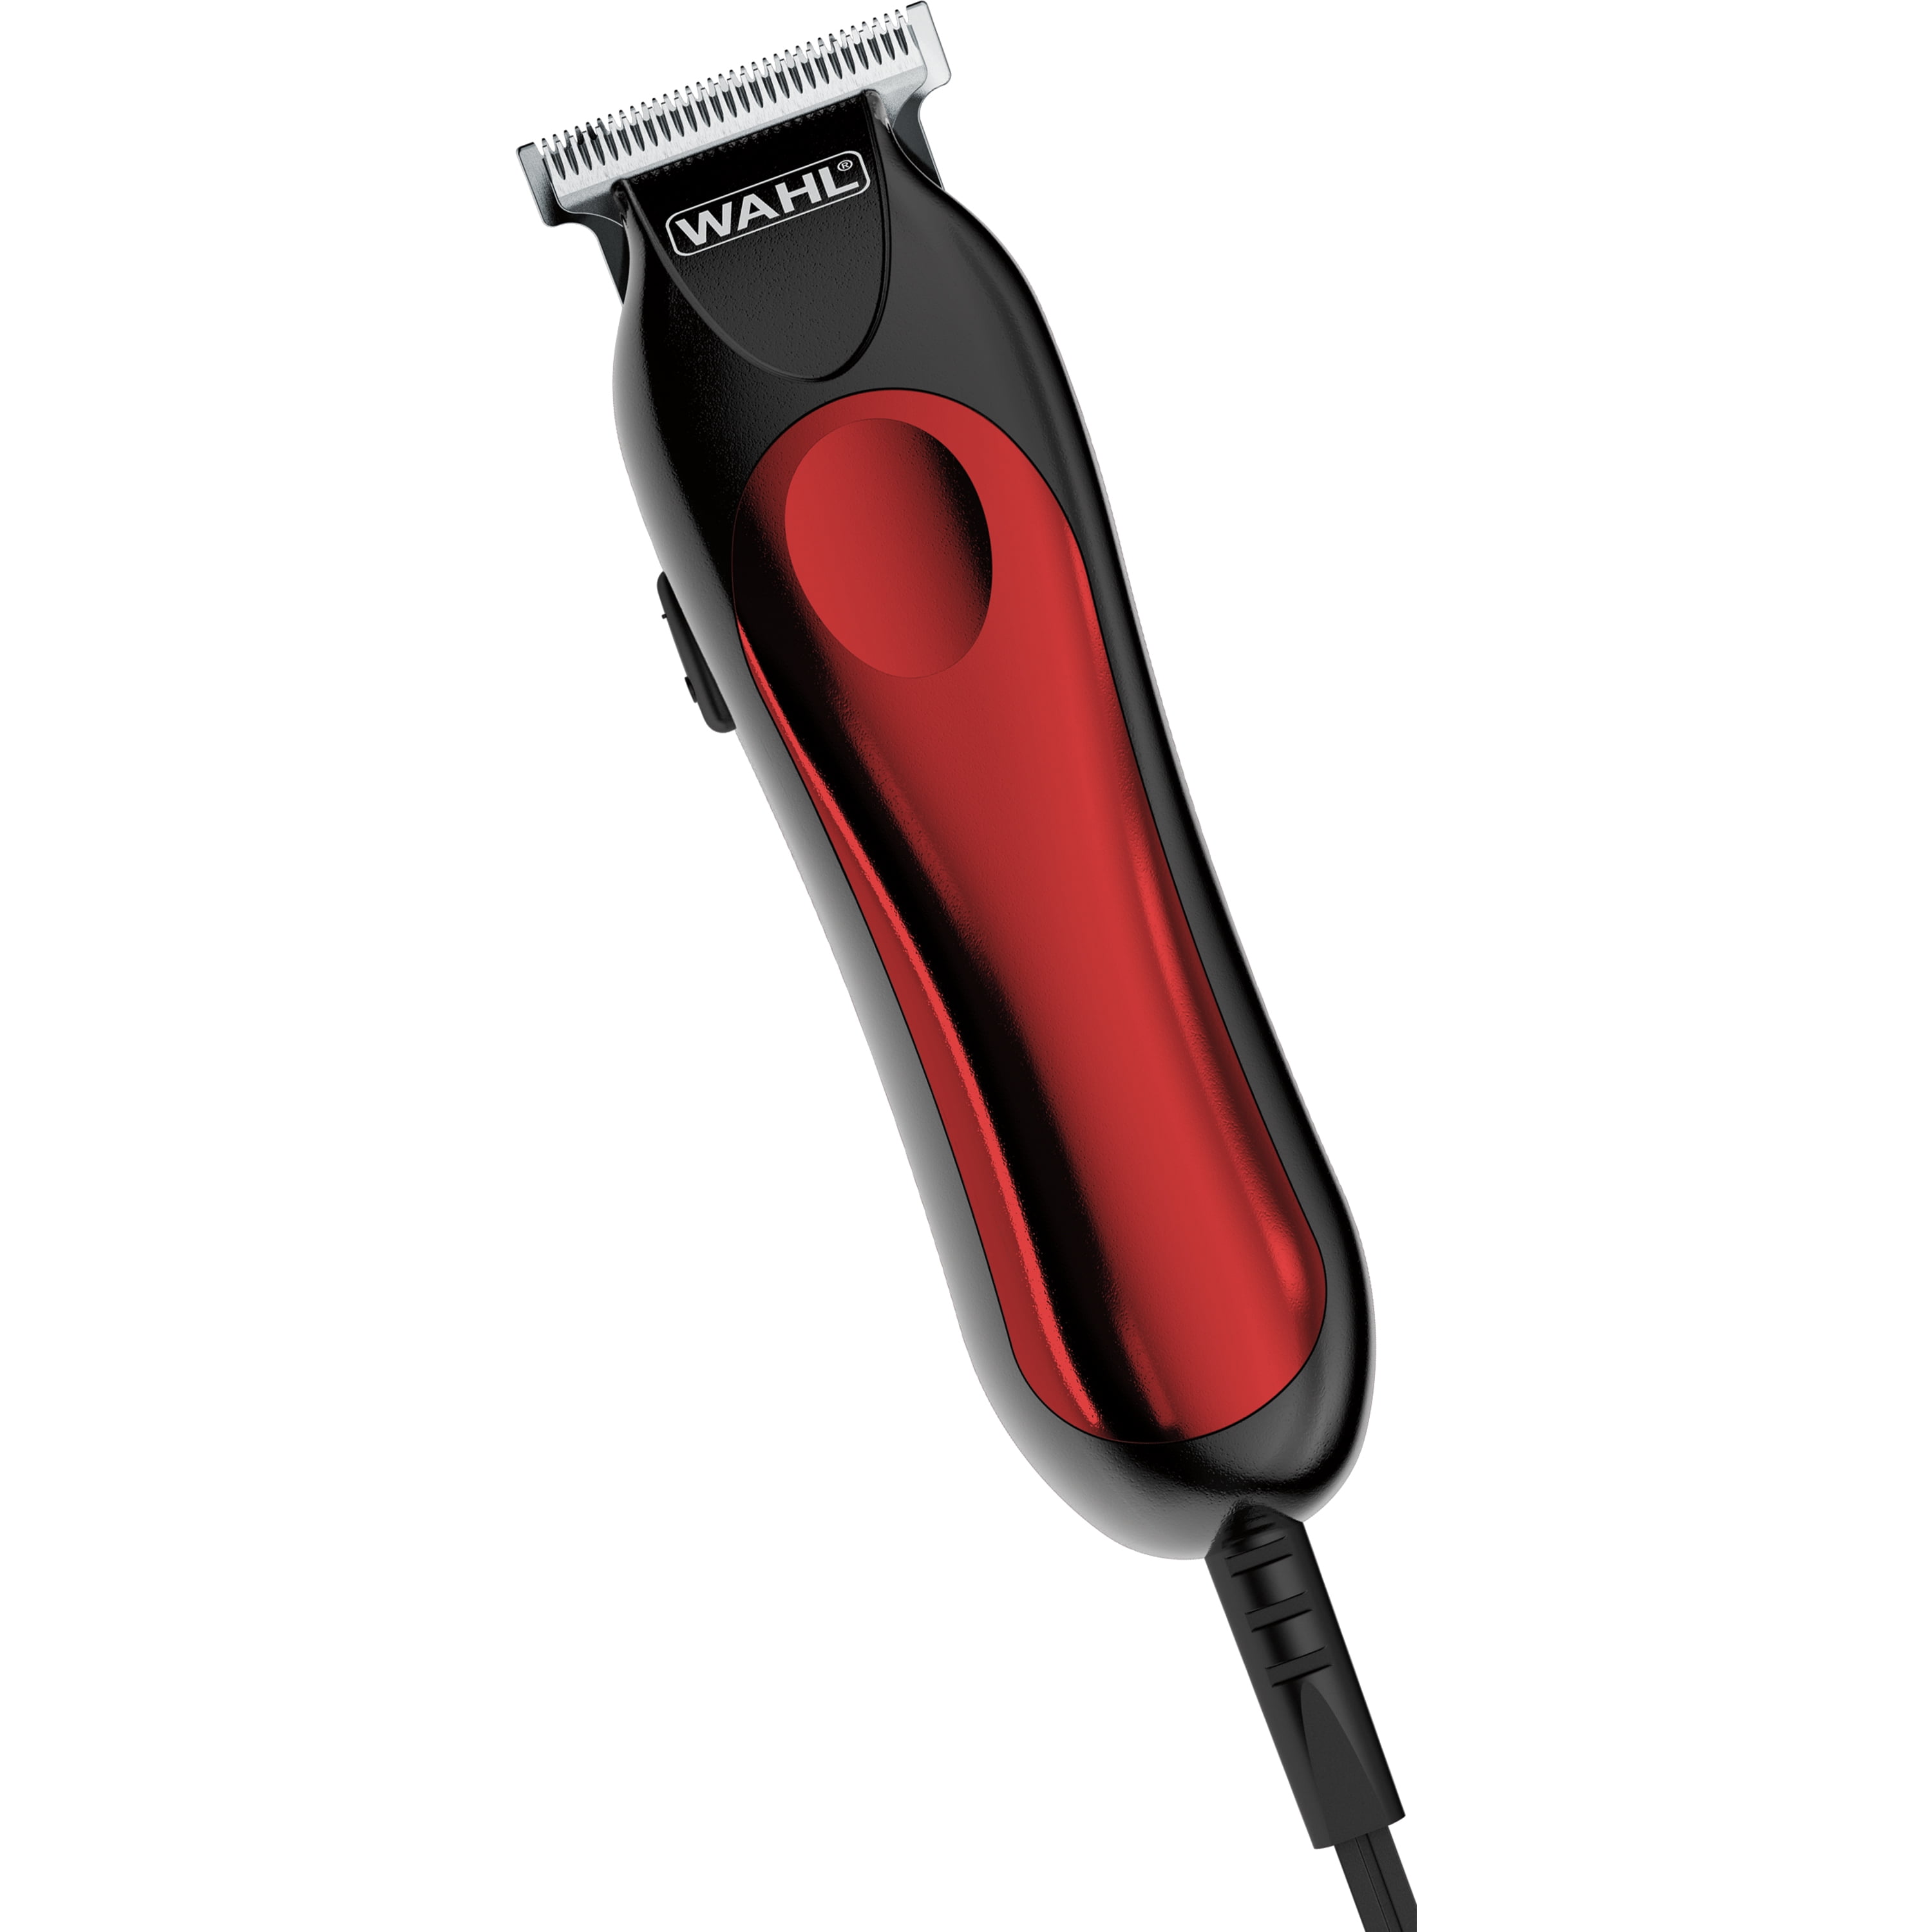 kabel prins charme Wahl Clipper T-Pro Corded Trimmer - Trim, detail, fade, outline and shave  with this versatile trimmer - Model 9307-300, Red/Black - Walmart.com